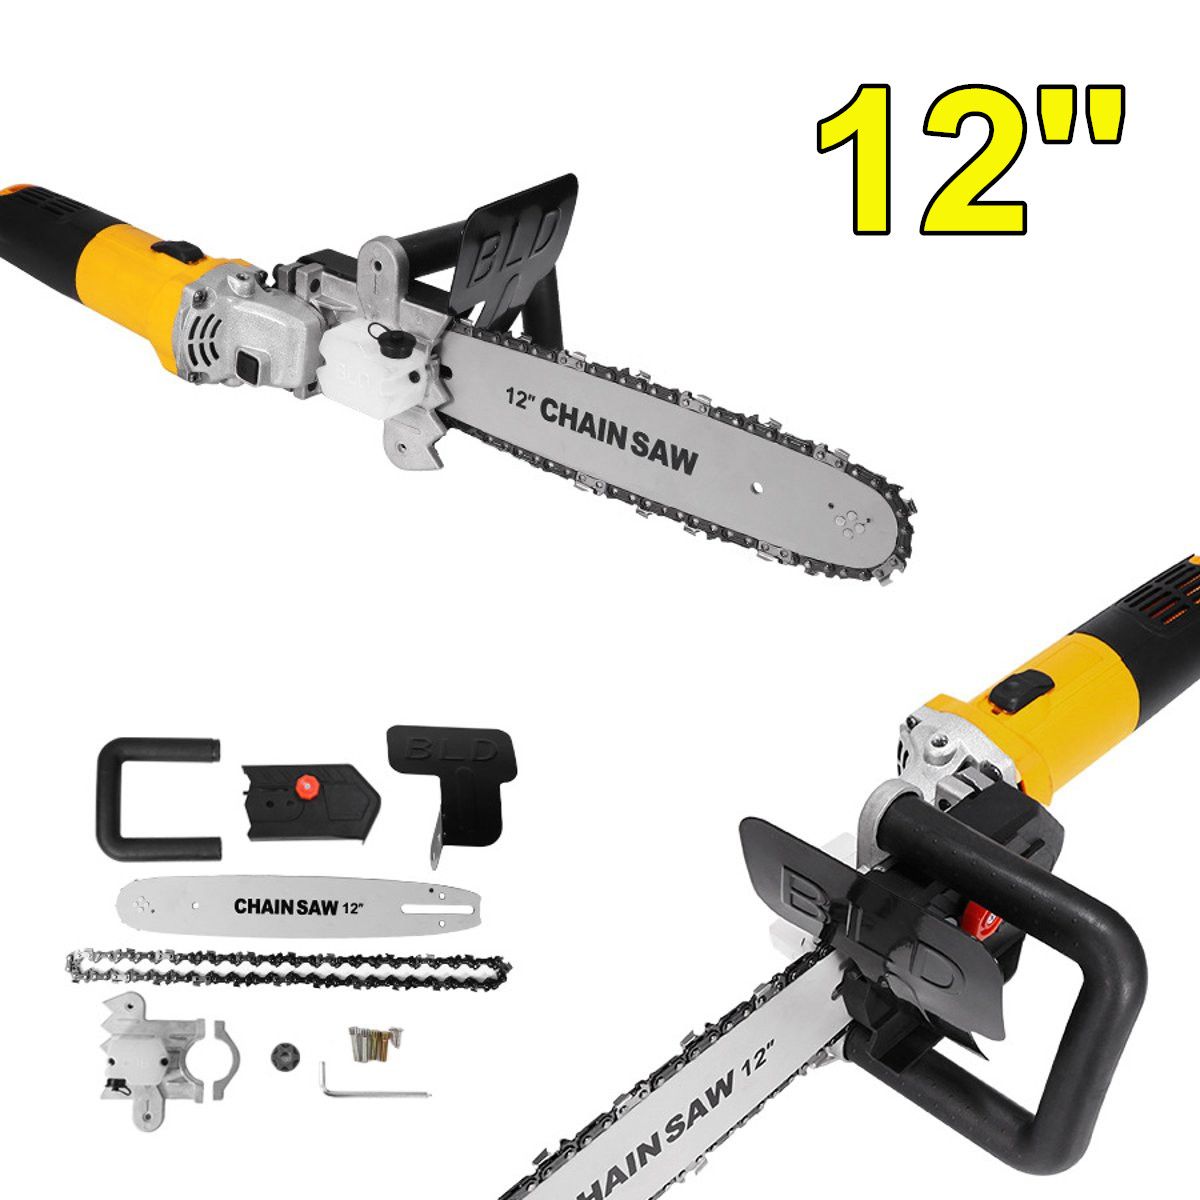 12-Inch-Chainsaw-Bracket-Electric-Chain-Saw-Stand-Set-Part-For-100-Angle-Grinder-1755370